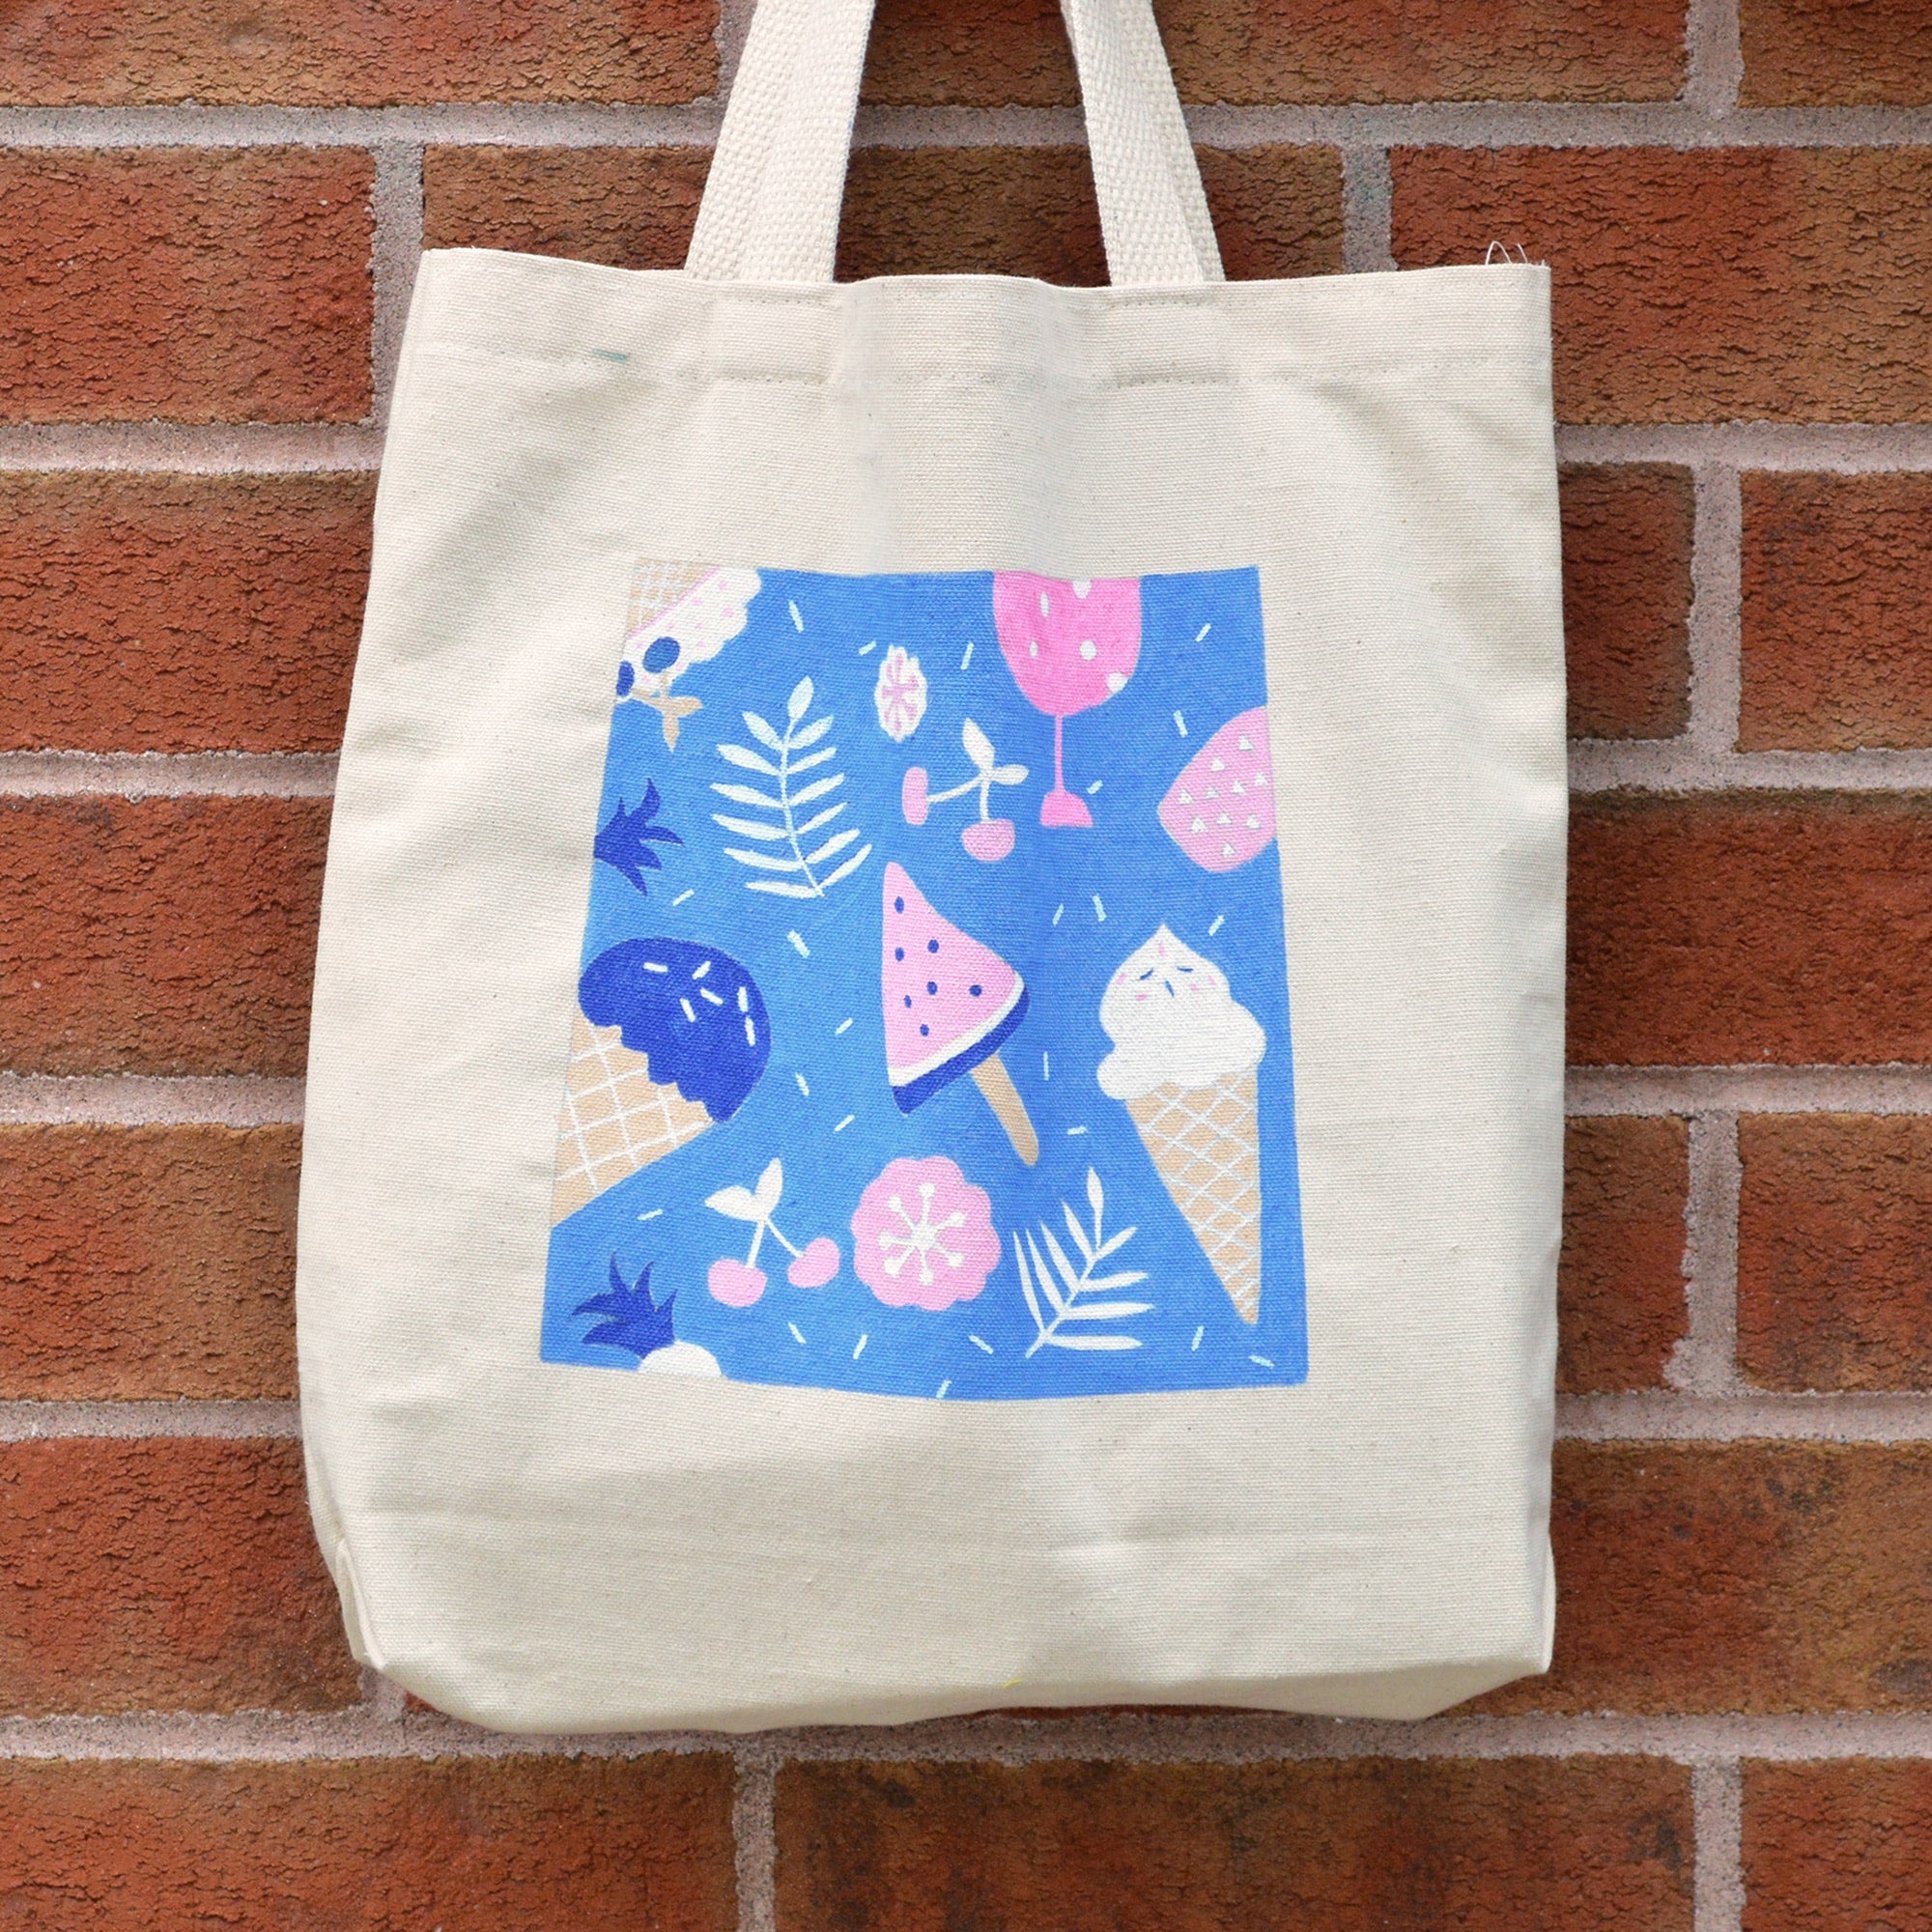 Posca markers reinvent the customized tote bag